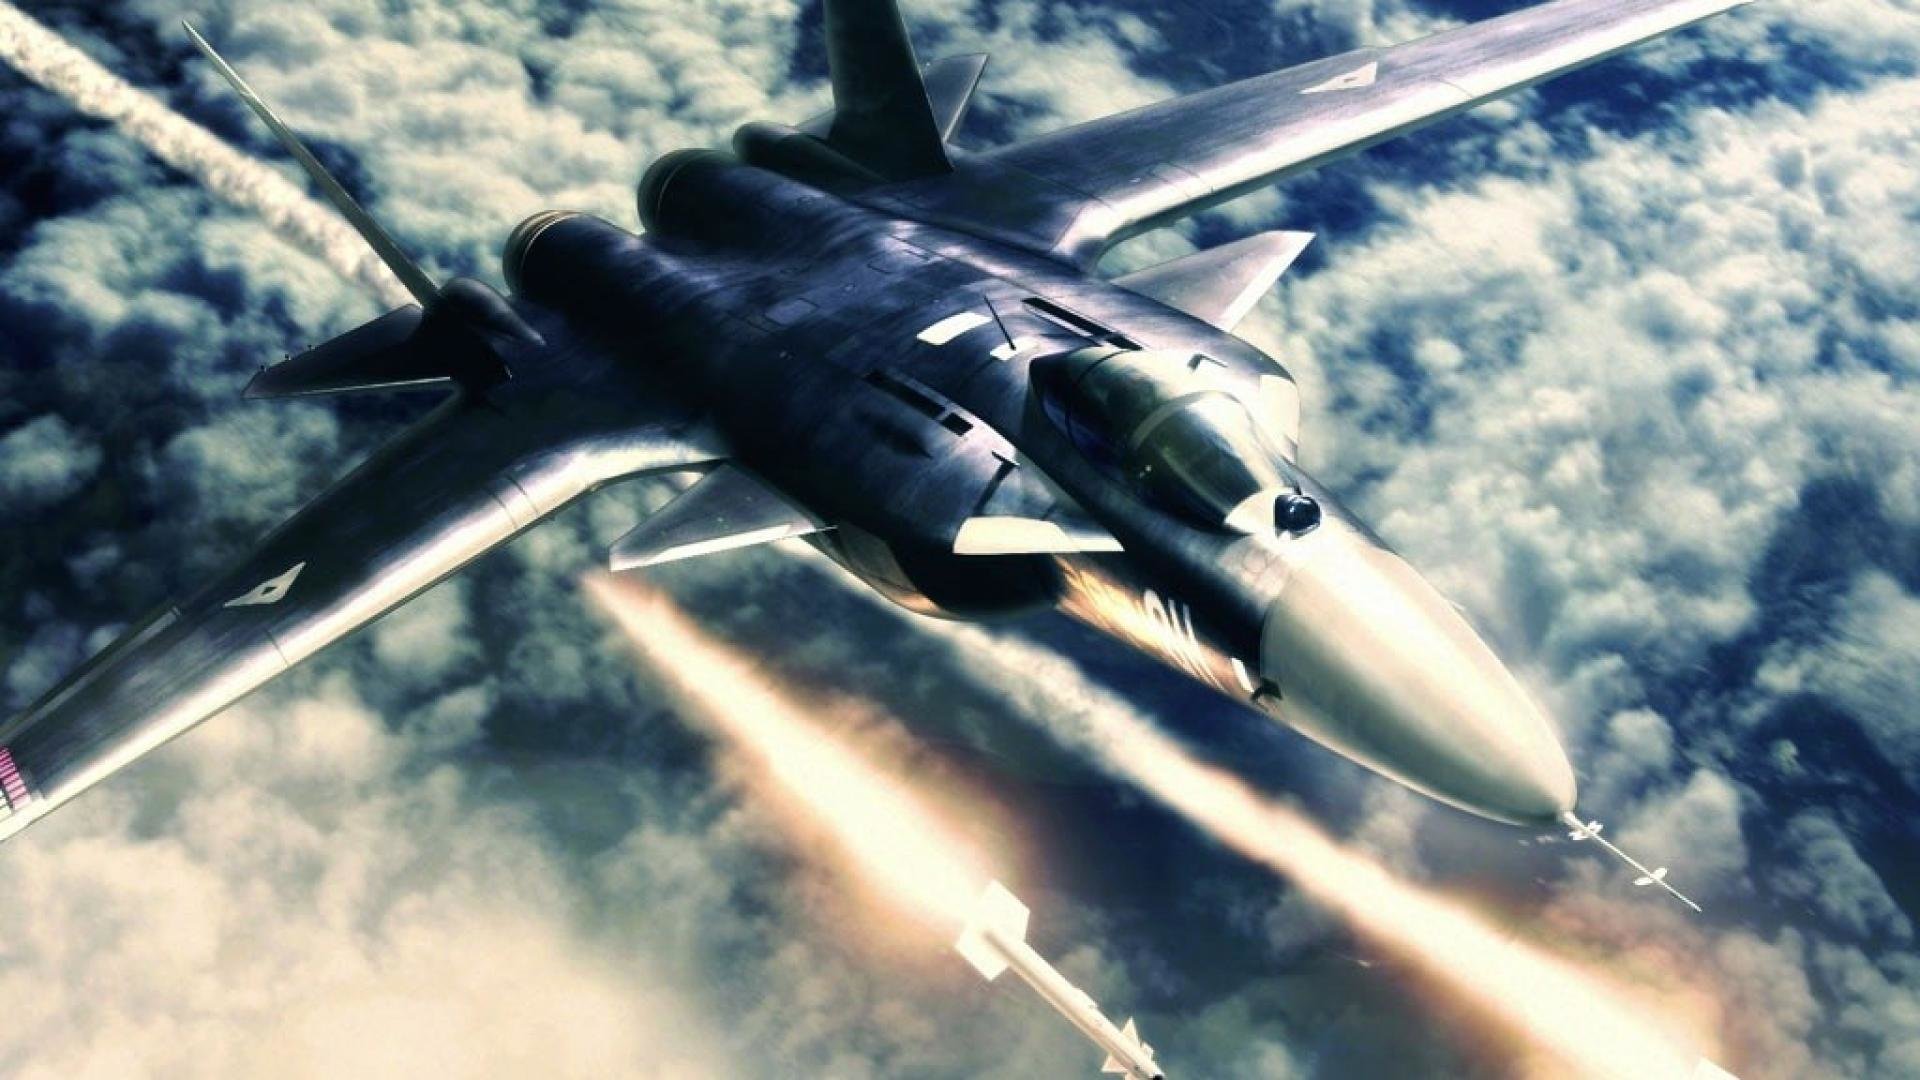 Download full hd 1920x1080 Ace Combat PC background ID:429913 for free